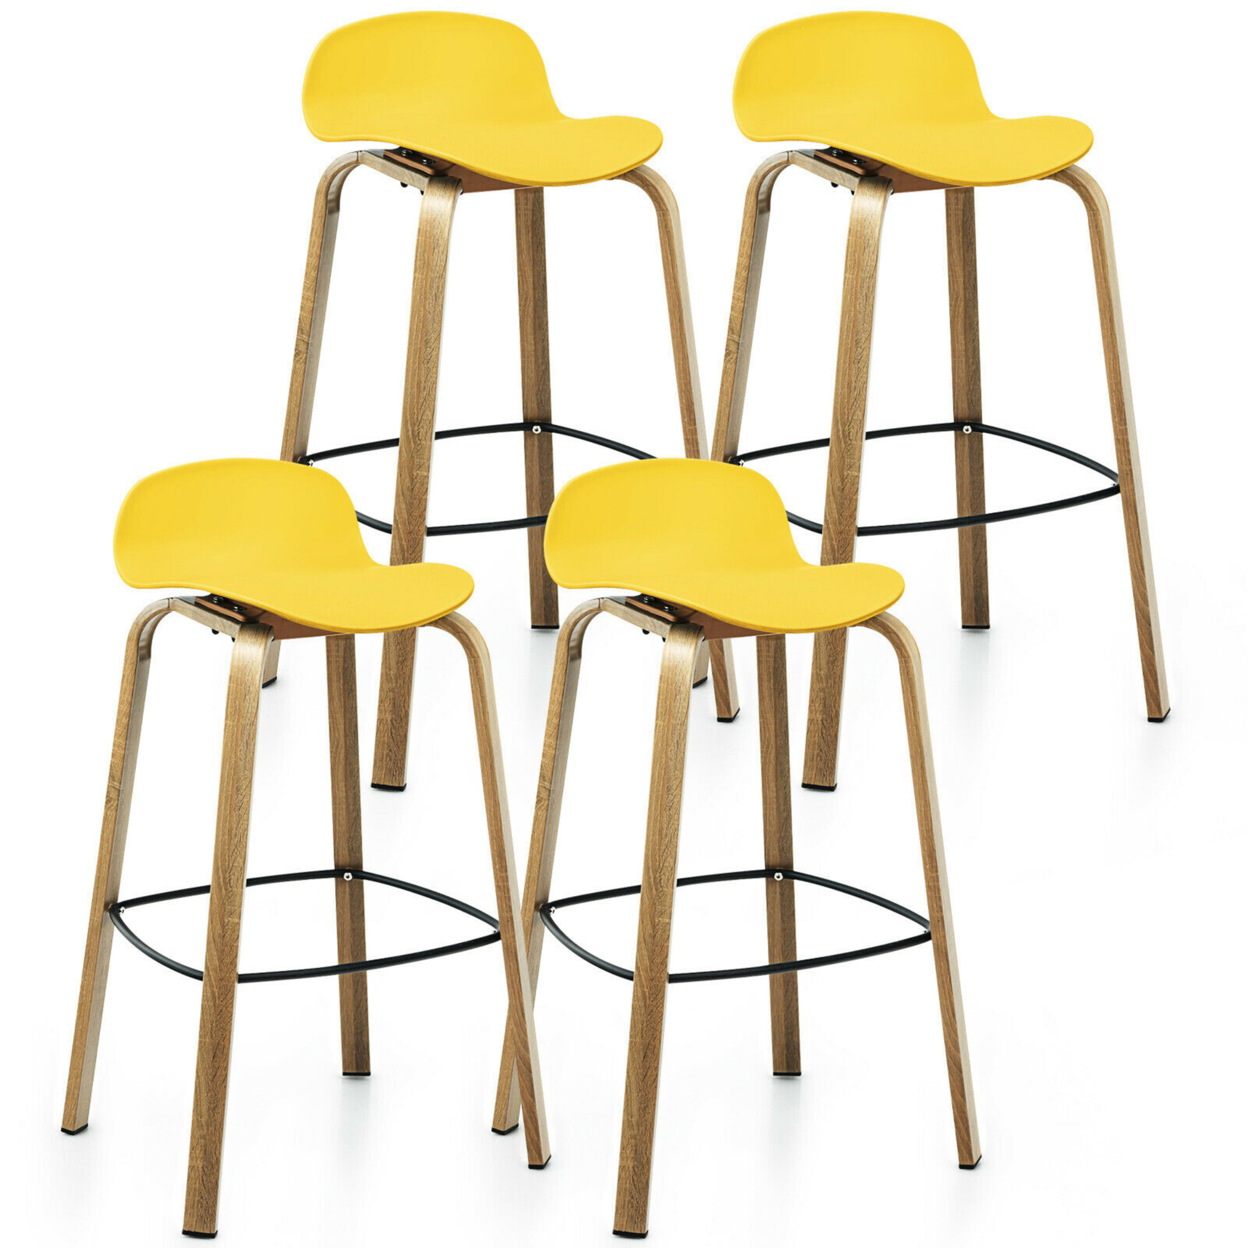 Modern Set Of 4 Barstools 30inch Pub Chairs W/Low Back & Metal Legs Yellow